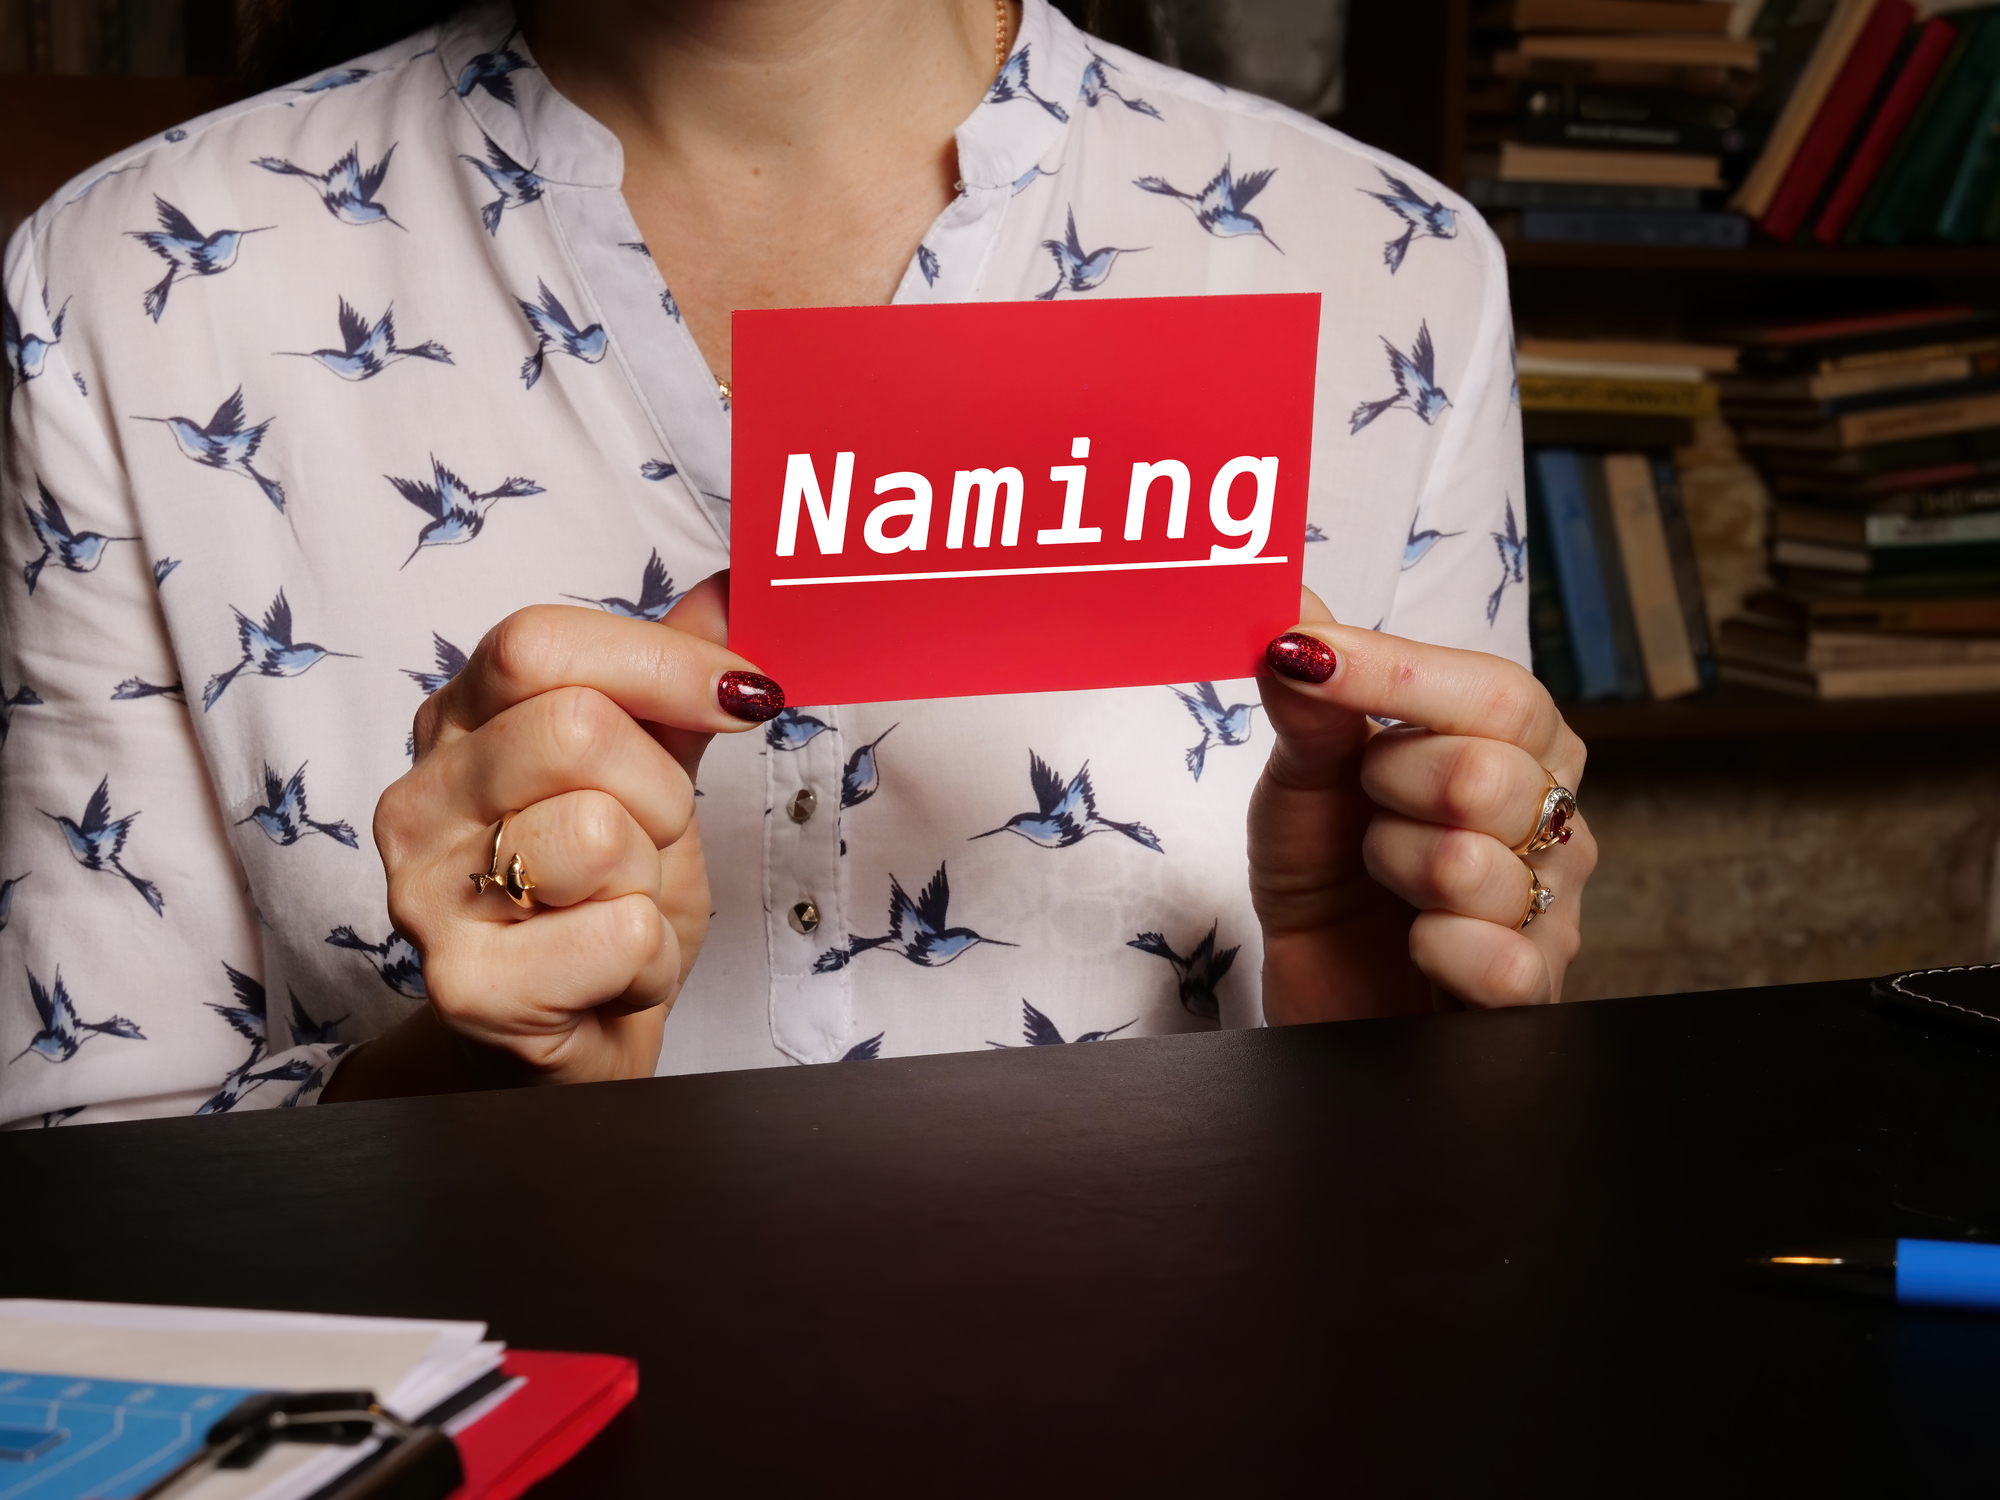 What is your naming convention?